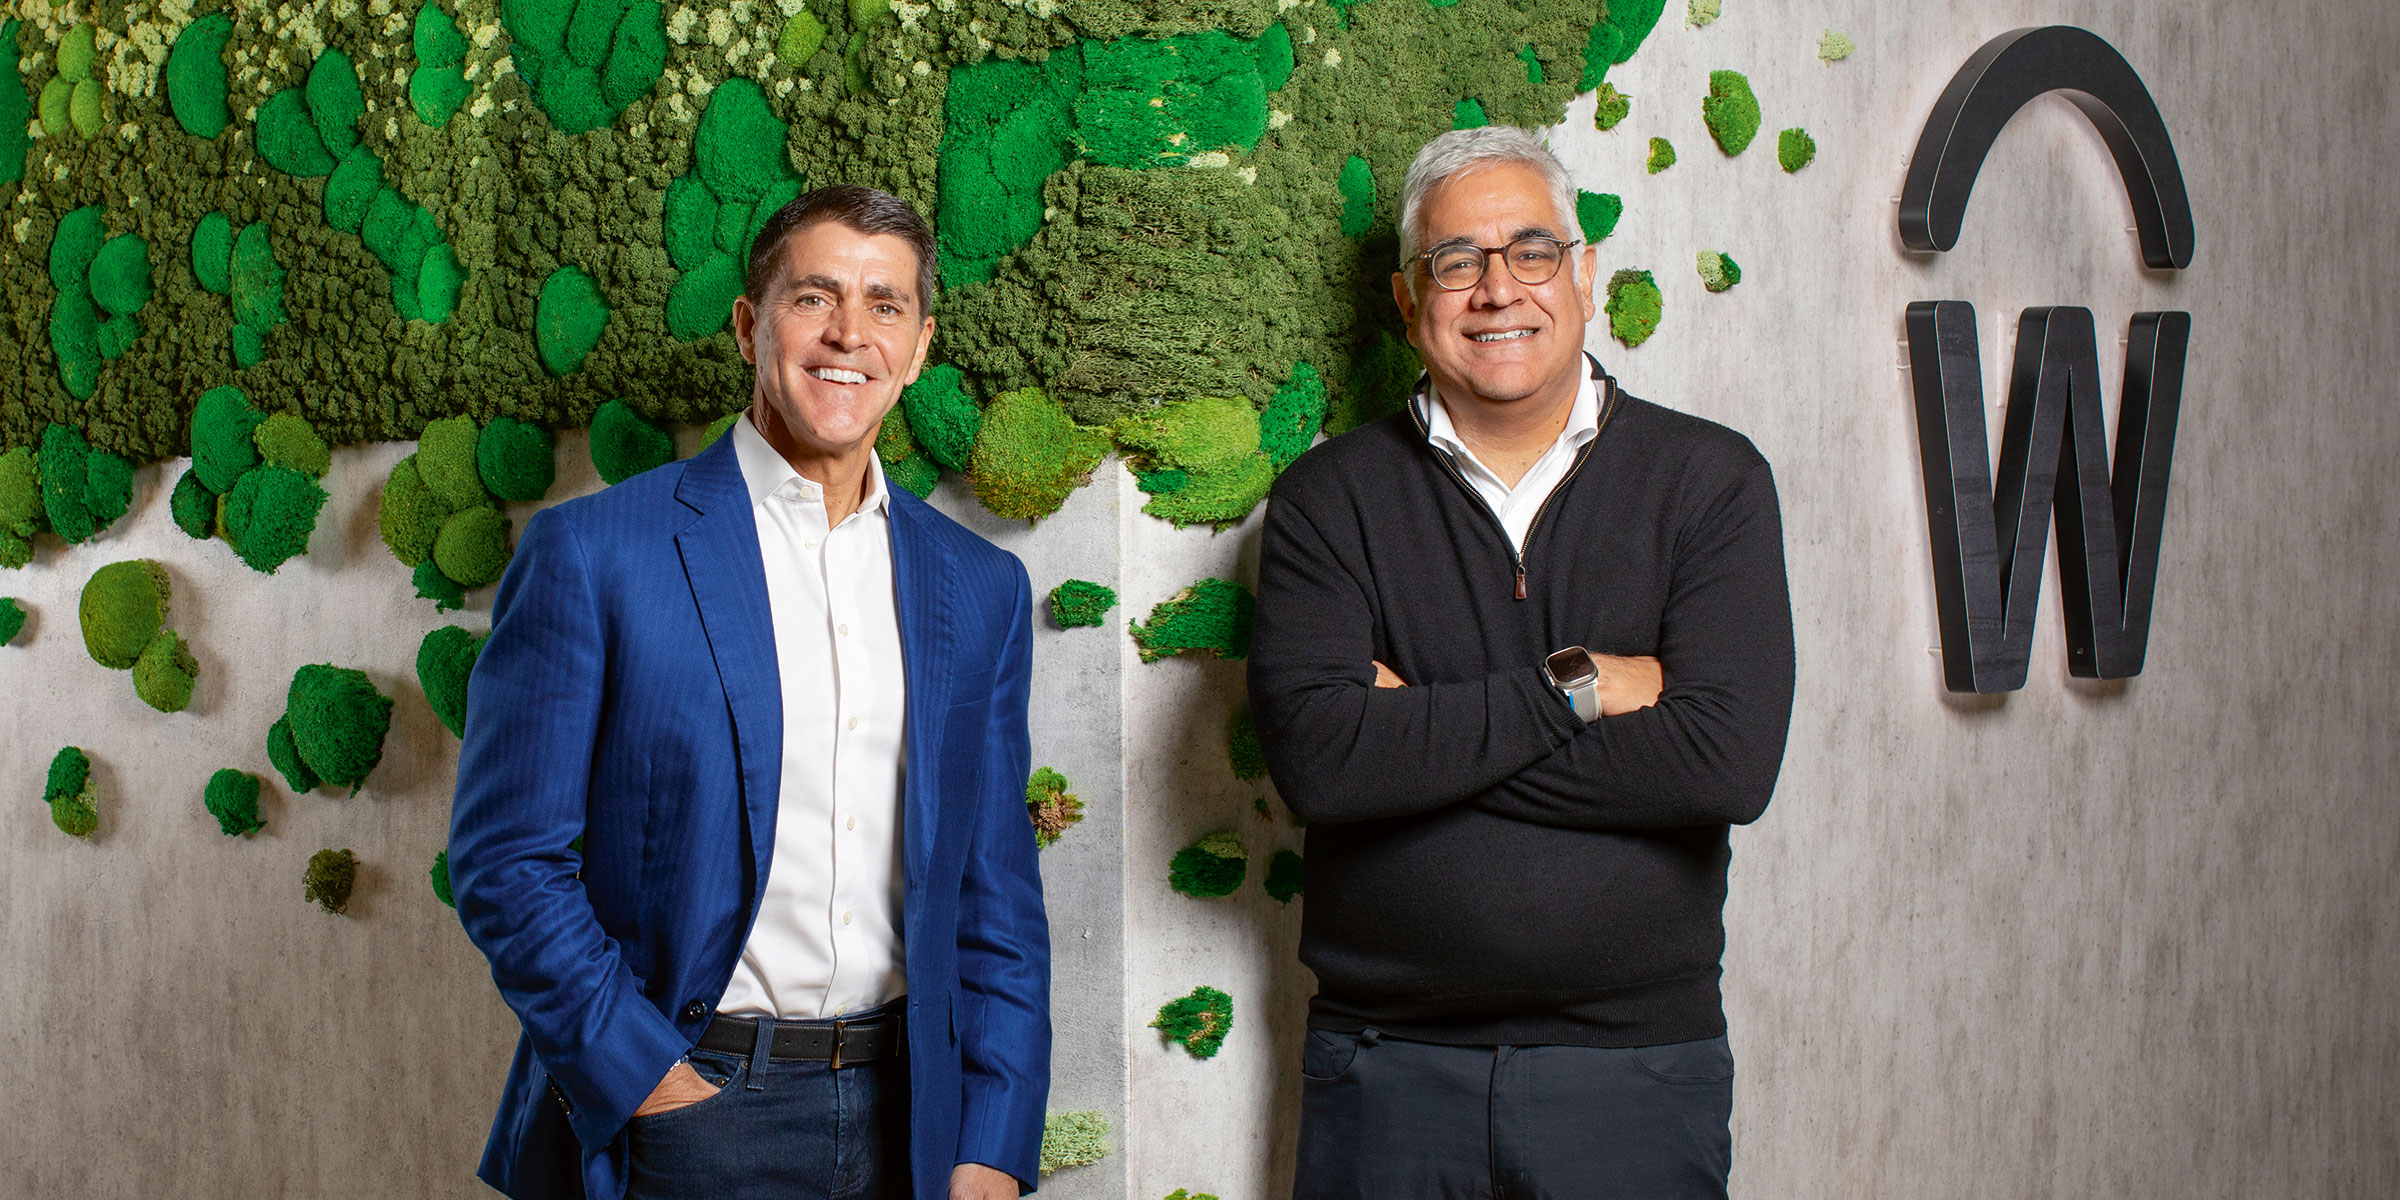 Carl Eschenbach and Aneel Bhusri, Workday